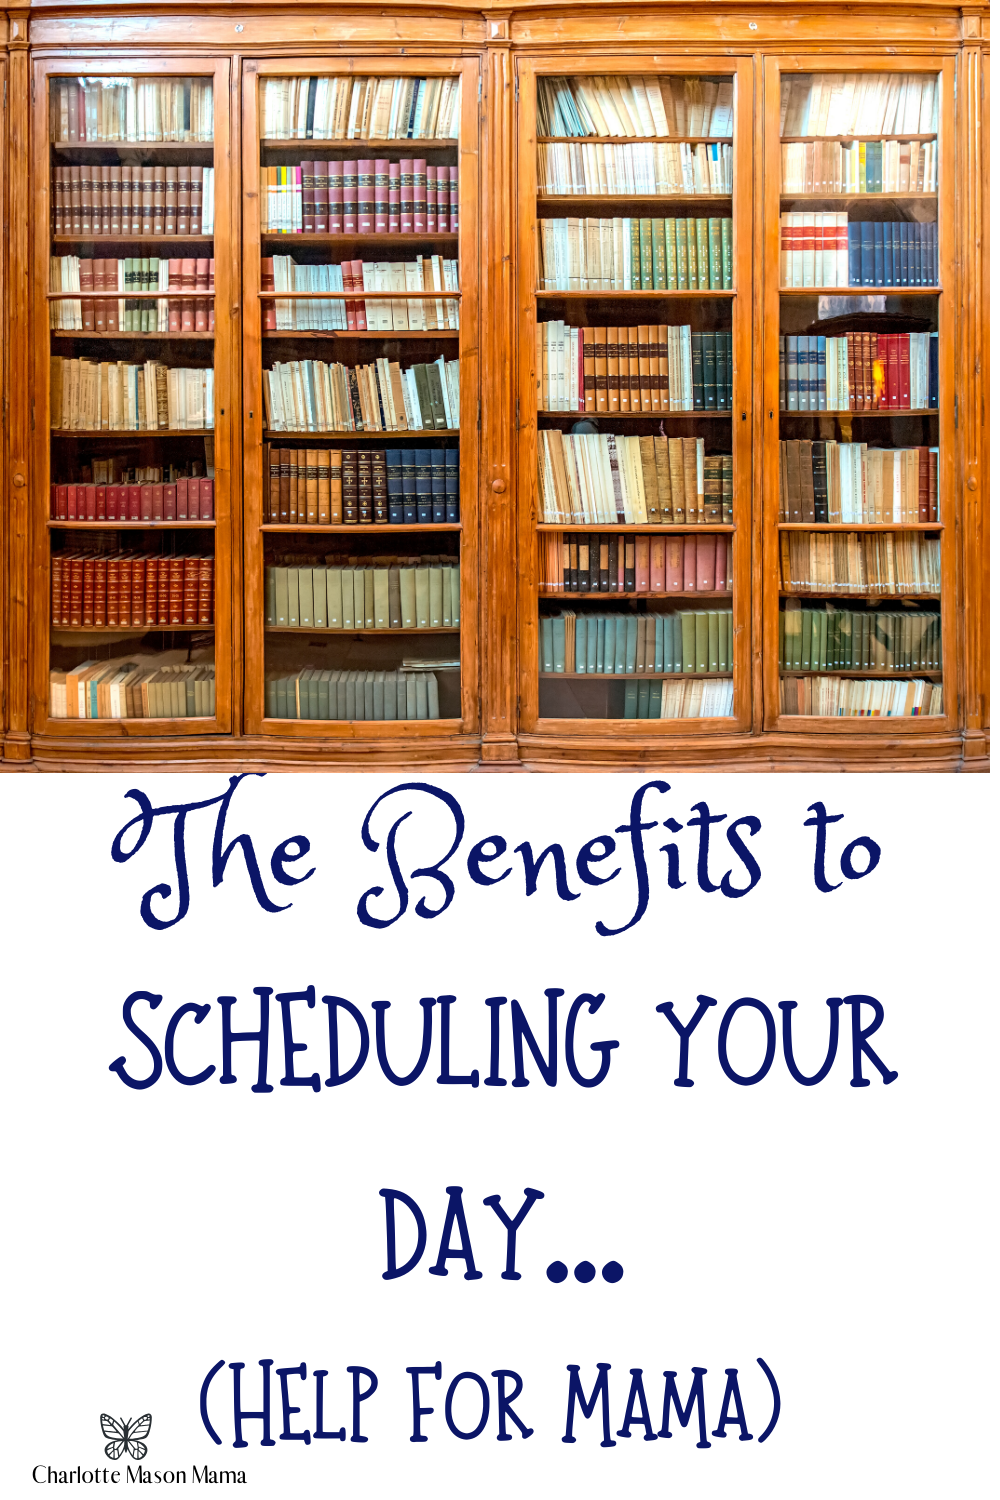 The Benefits to Schedules (help for mama!)